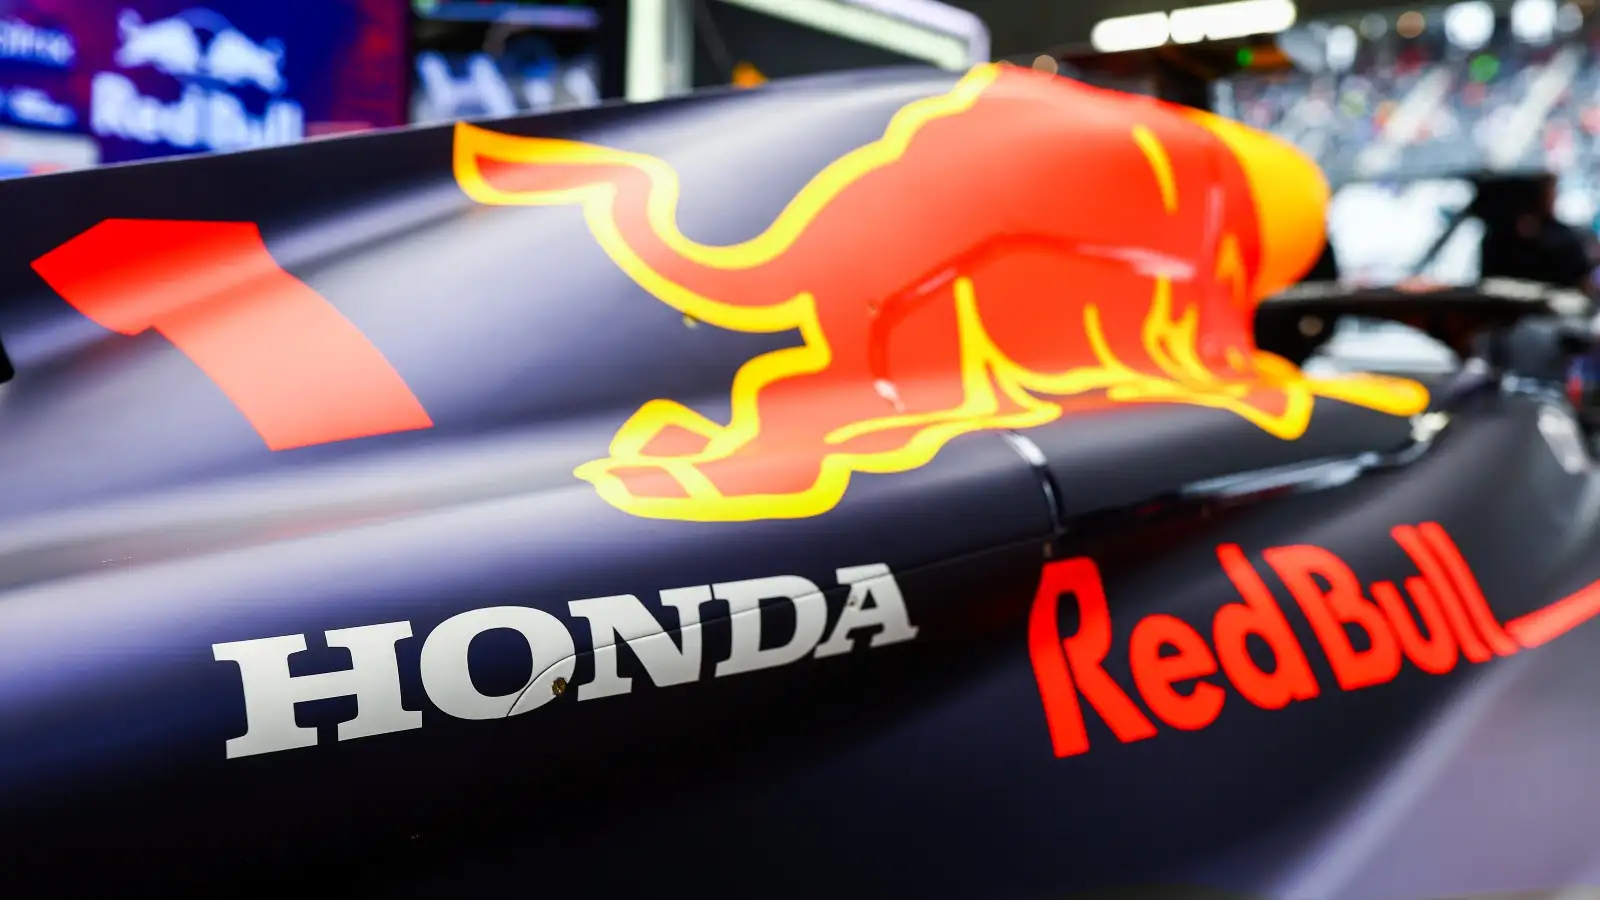 The Honda and Red Bull logos on the side of the RB18. Suzuka, Japan. October 2022